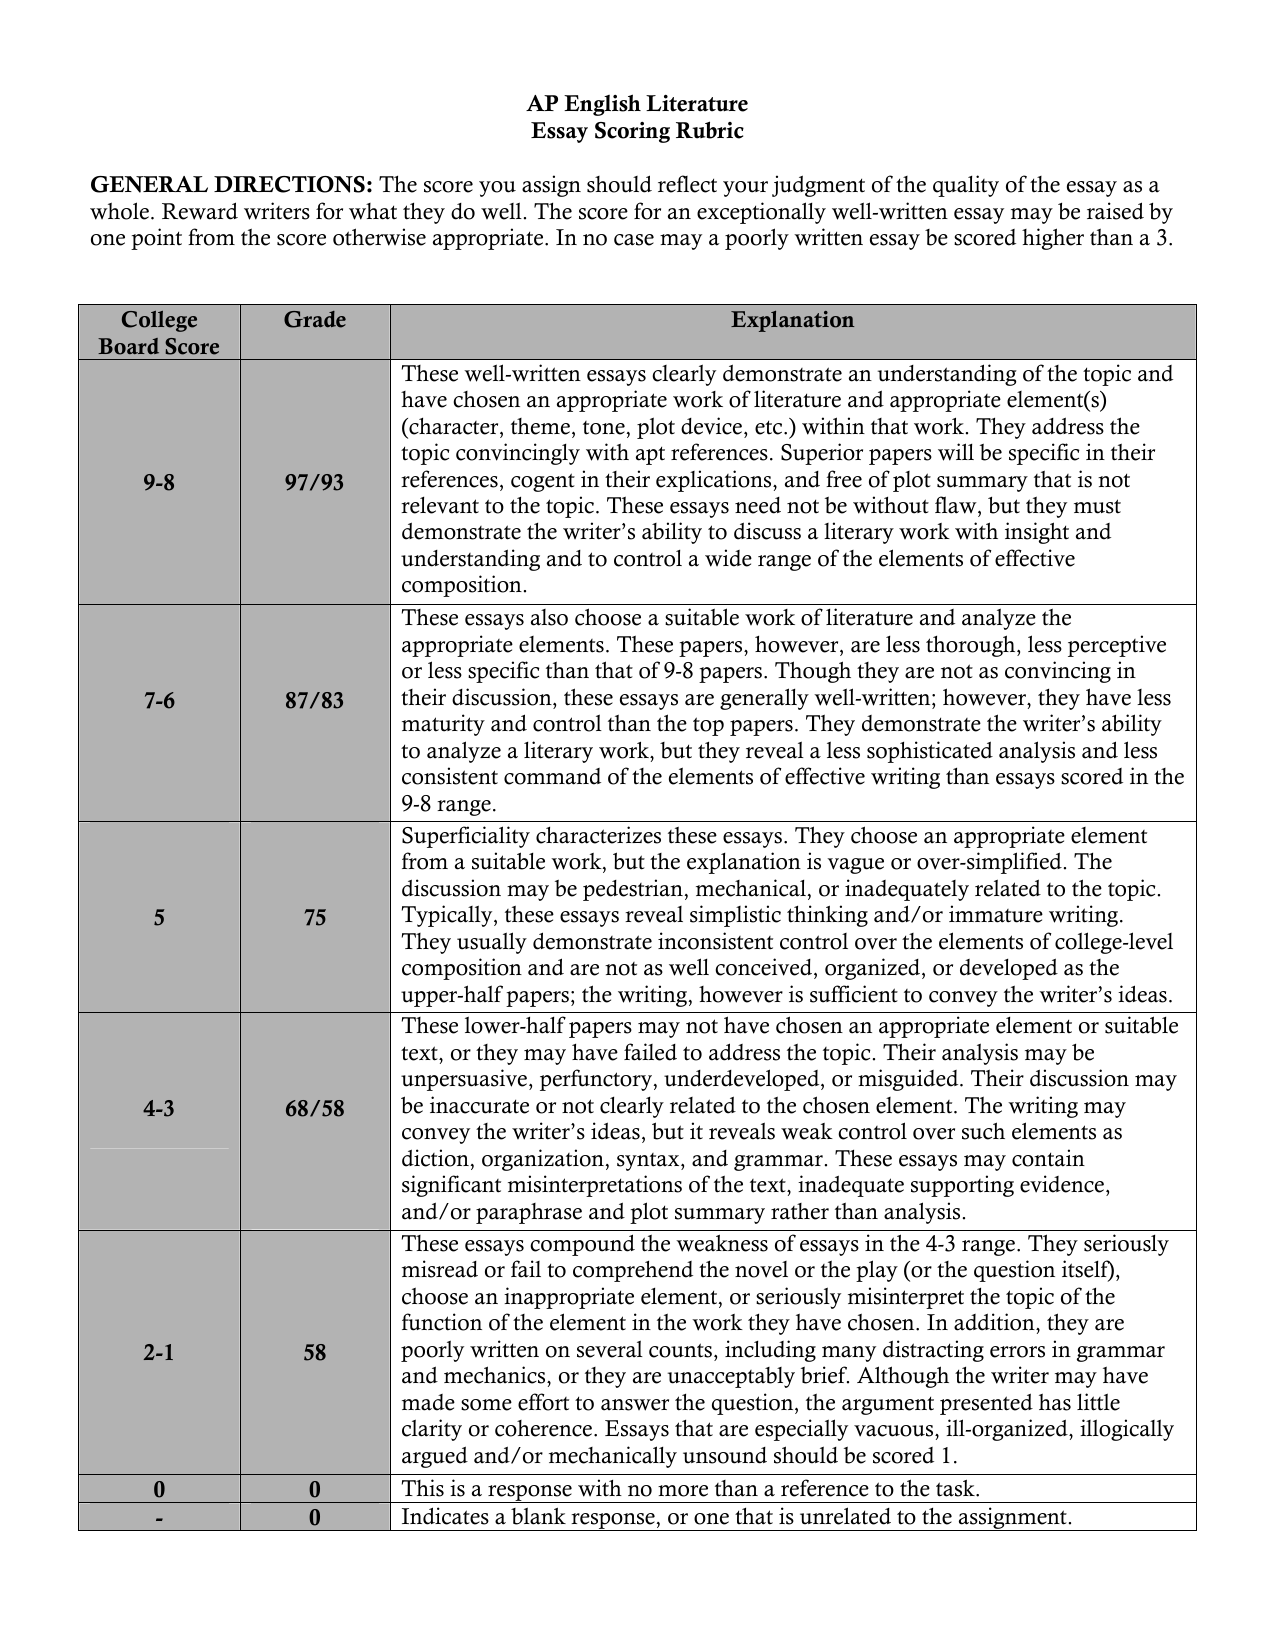 Figure 3: caption in document. Alt-text: Fig. 3. Screenshot of AP rubric for English literature exam assessment. This black, white, and gray image contains a screenshot of the rubric for the AP English Literature exam. At the top is a set of “General Directions,” below which is a 8x3 chart outlining the criteria for College Board scores (9-0) and grades (97-0), as well as explanations for each score.